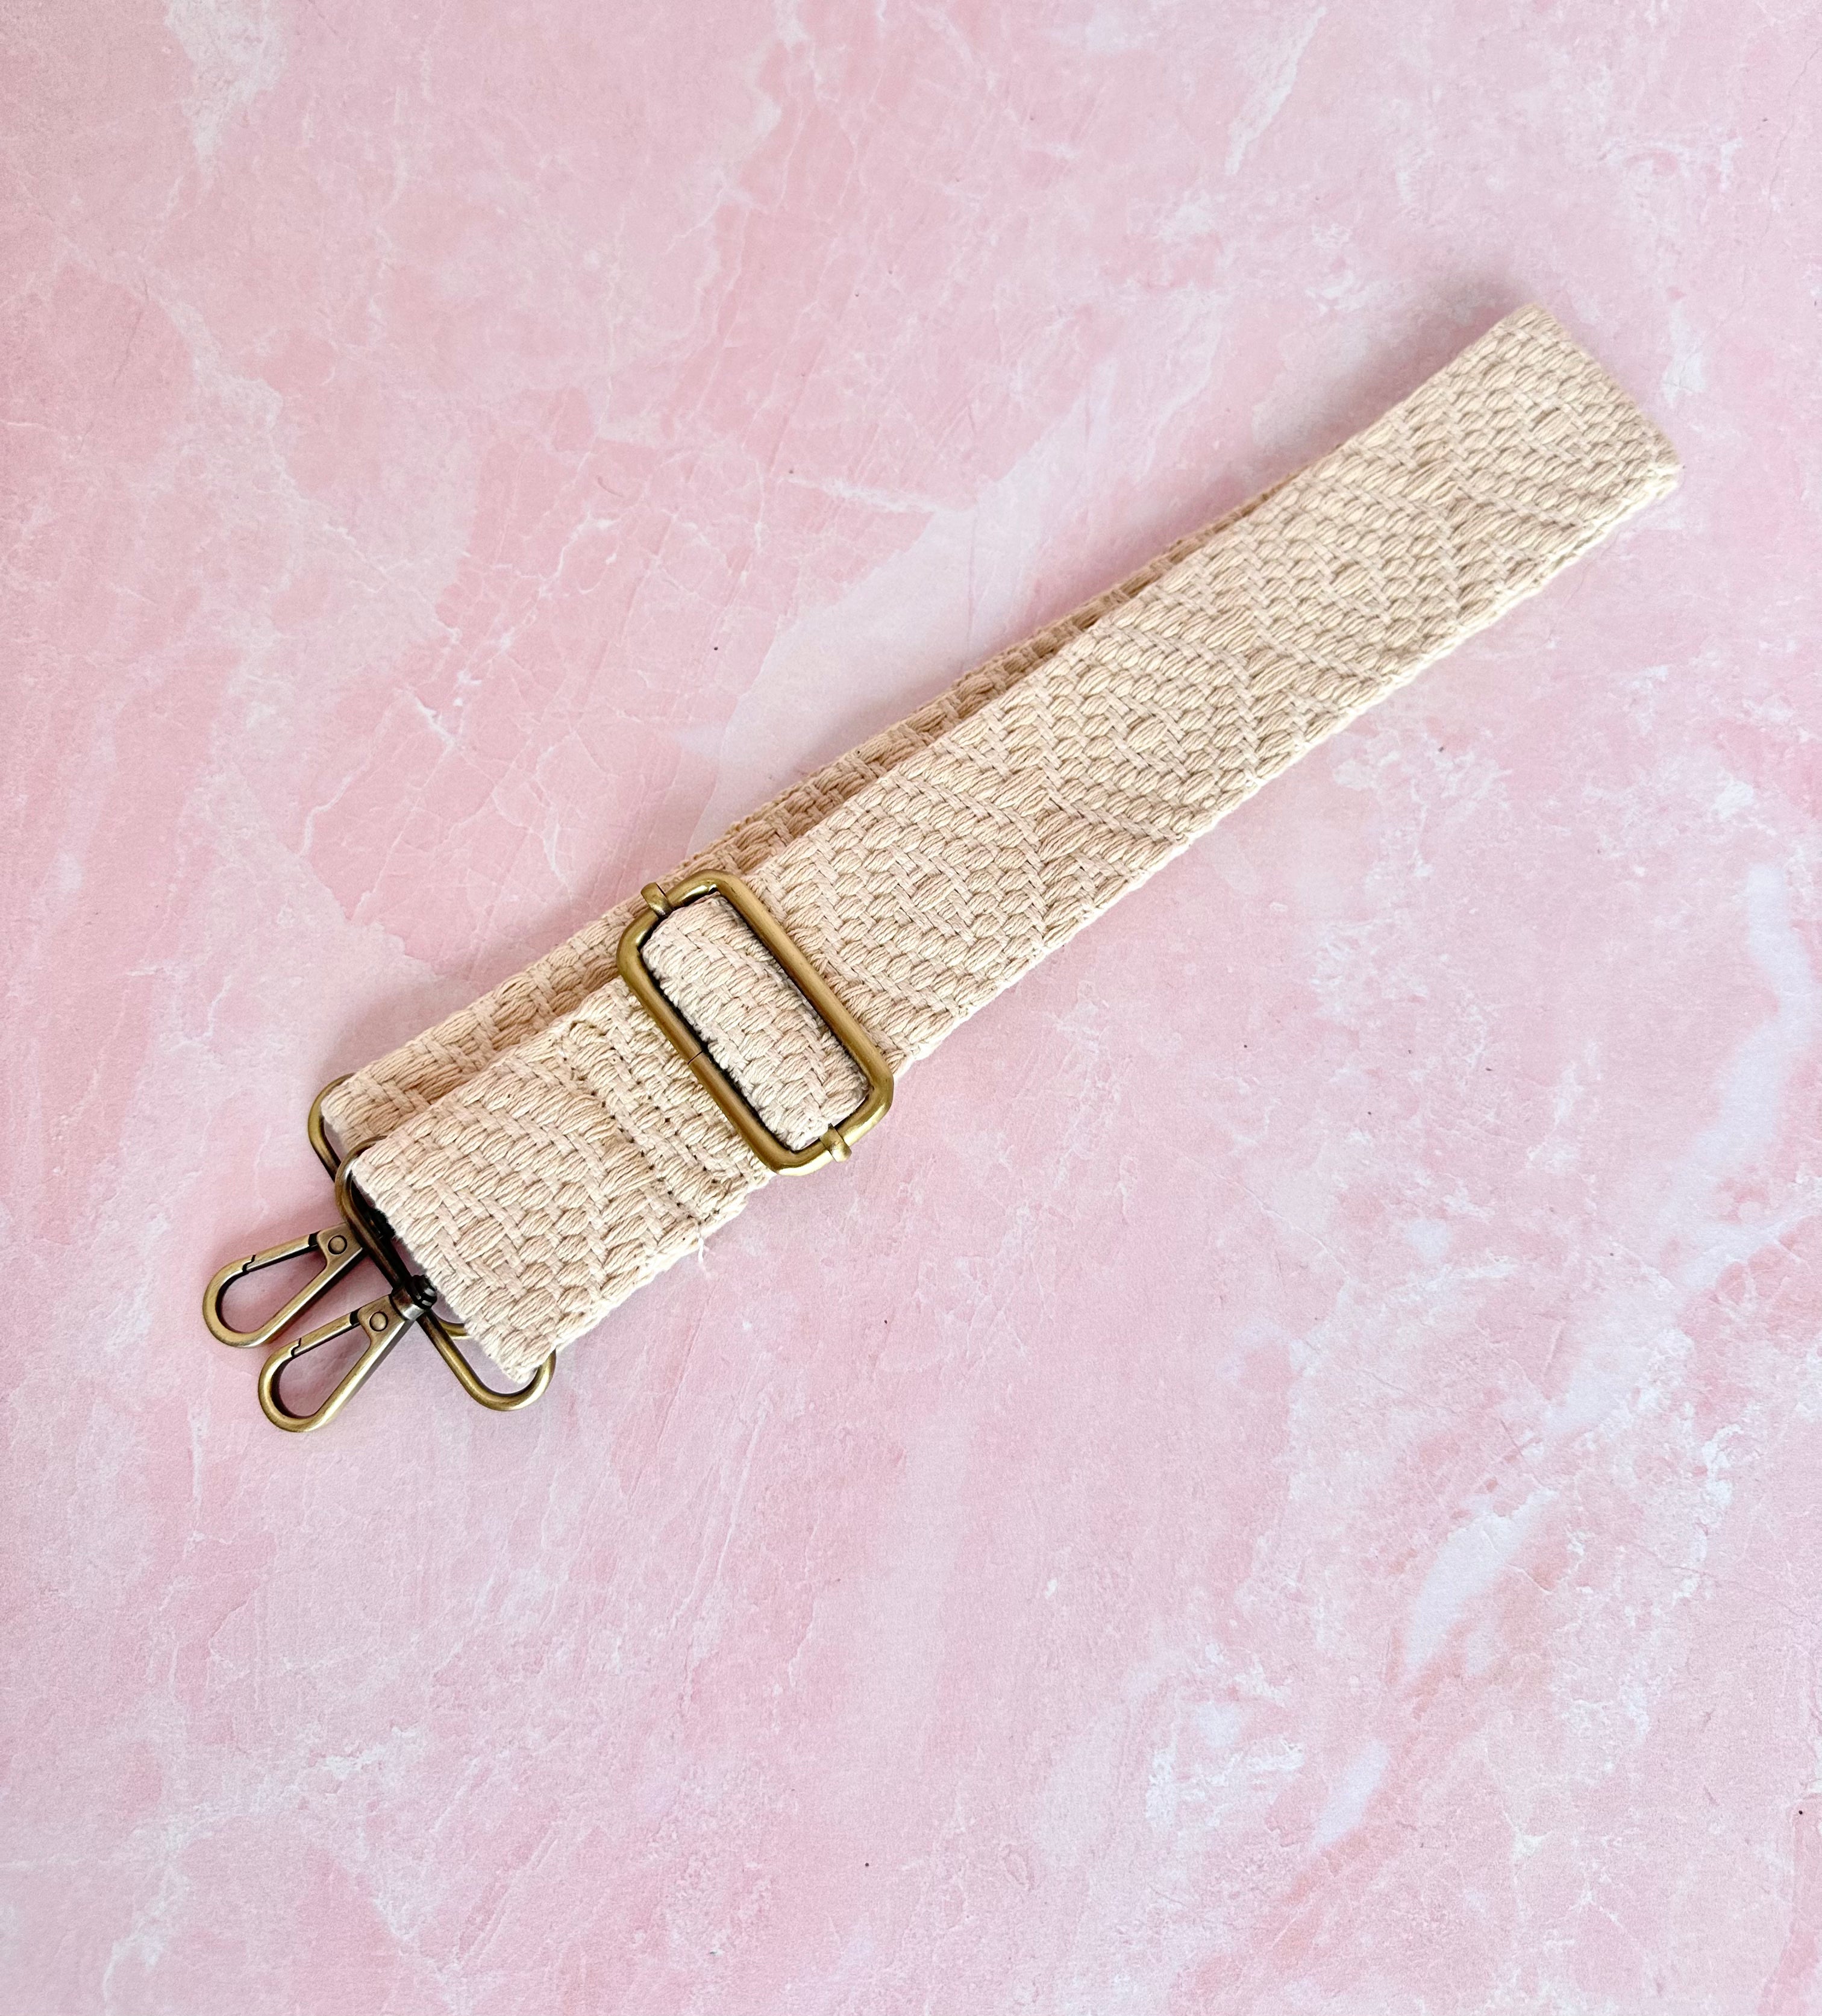 Ebony and Ivory Textured Guitar Strap